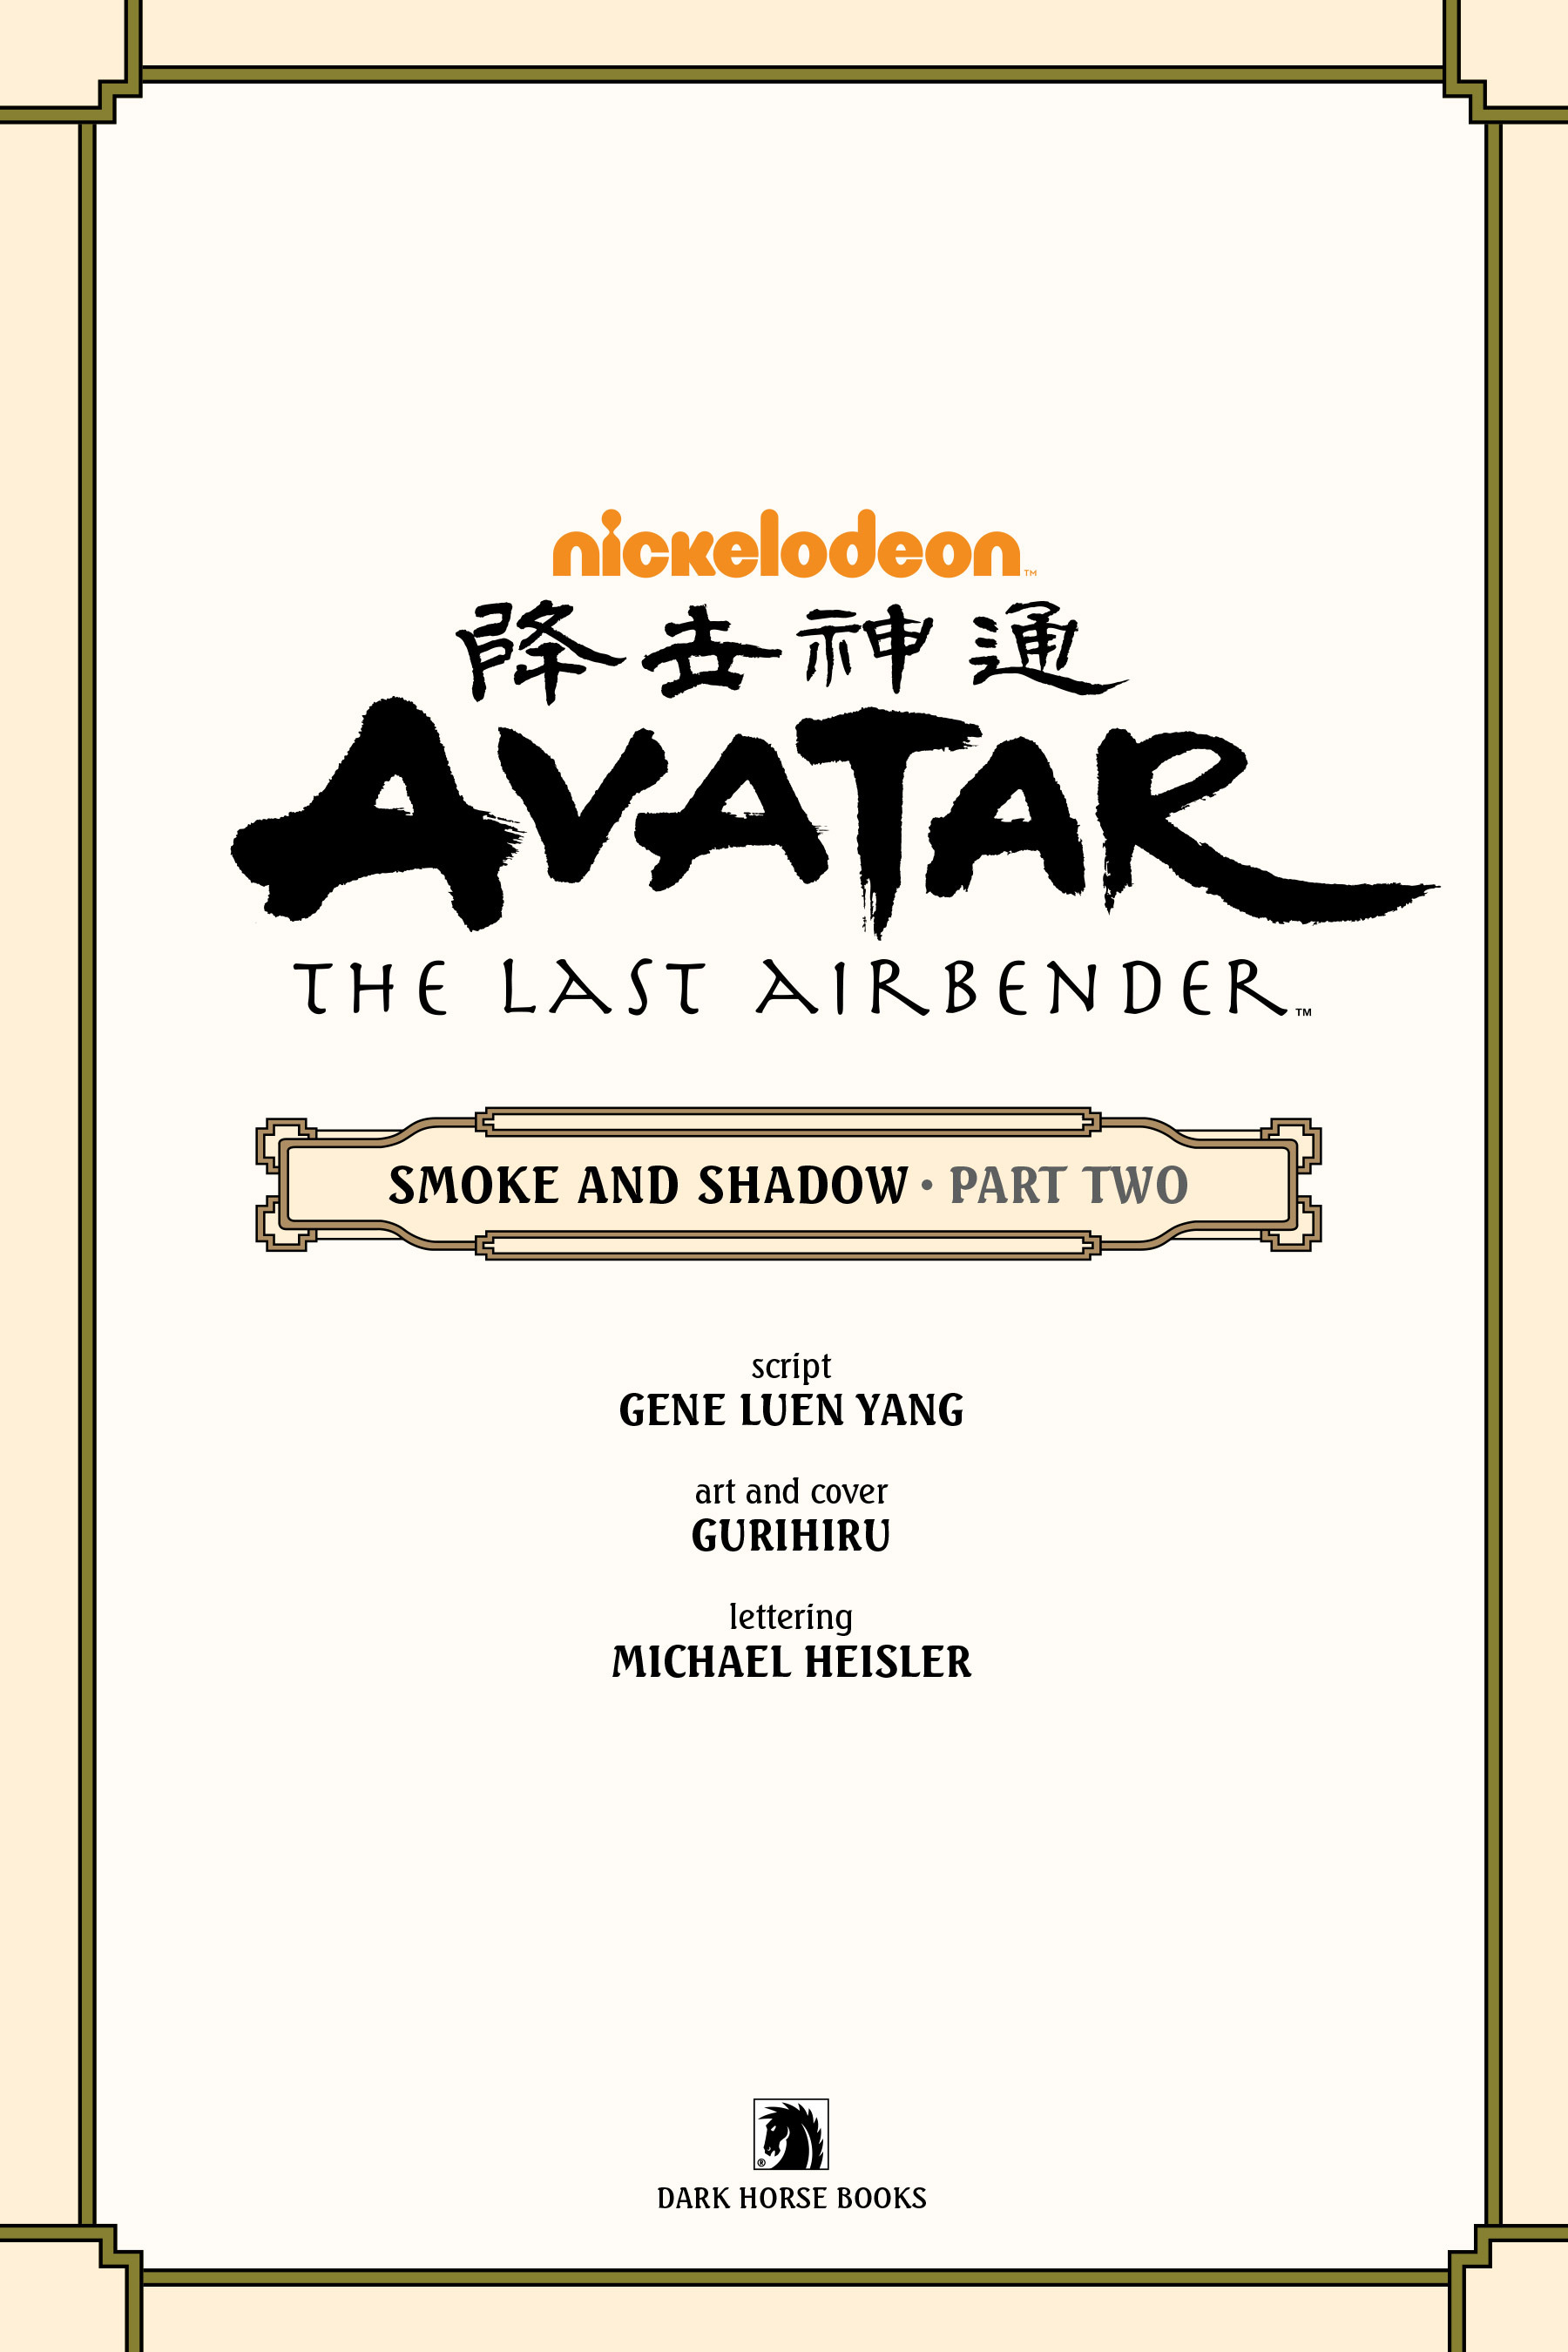 Read online Nickelodeon Avatar: The Last Airbender - Smoke and Shadow comic -  Issue # Part 2 - 5